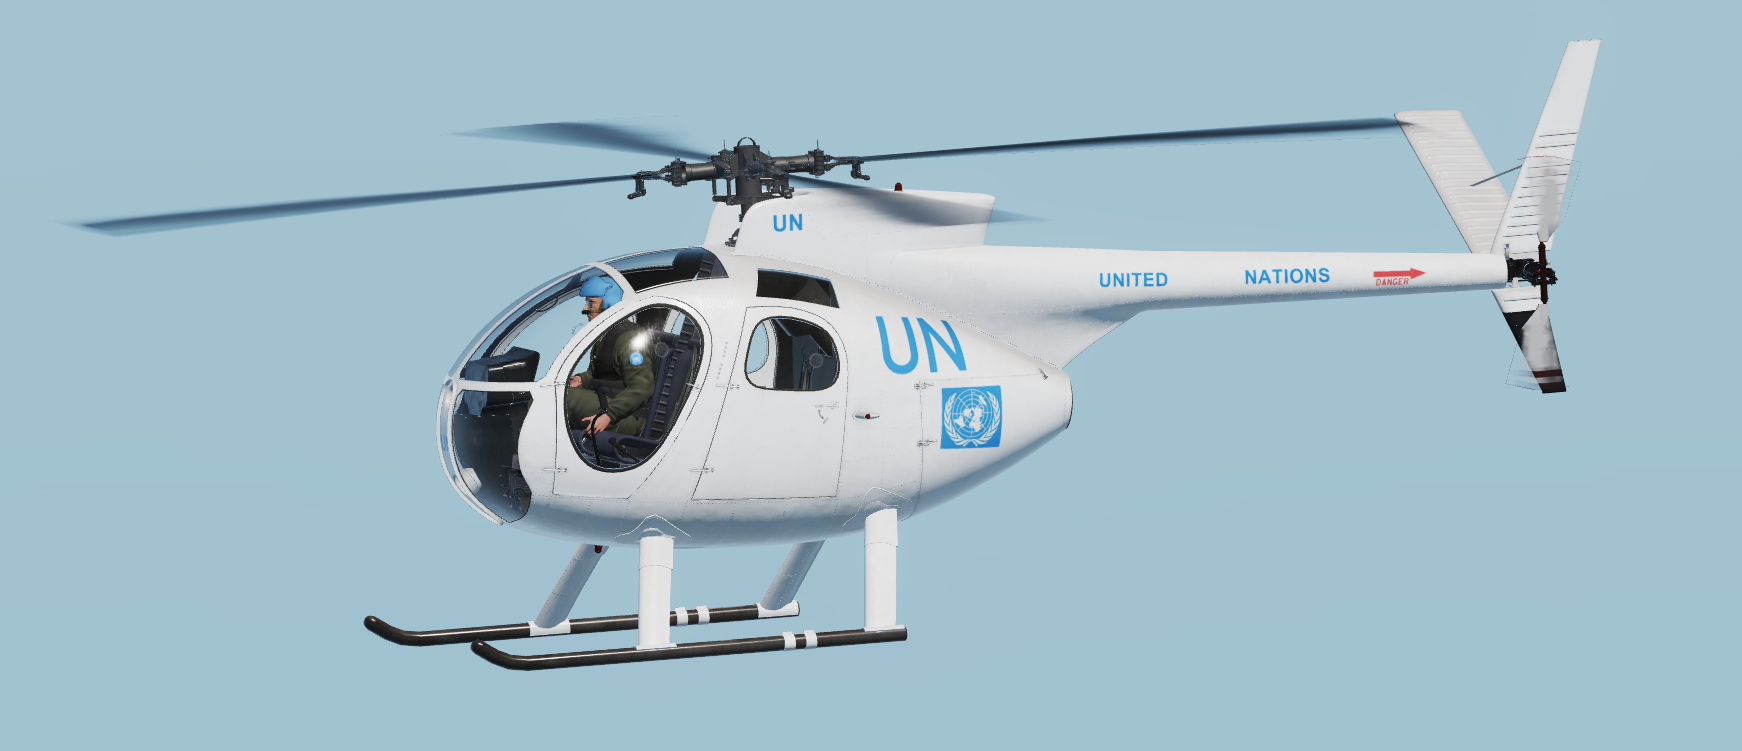 OH-6A UNITED NATIONS